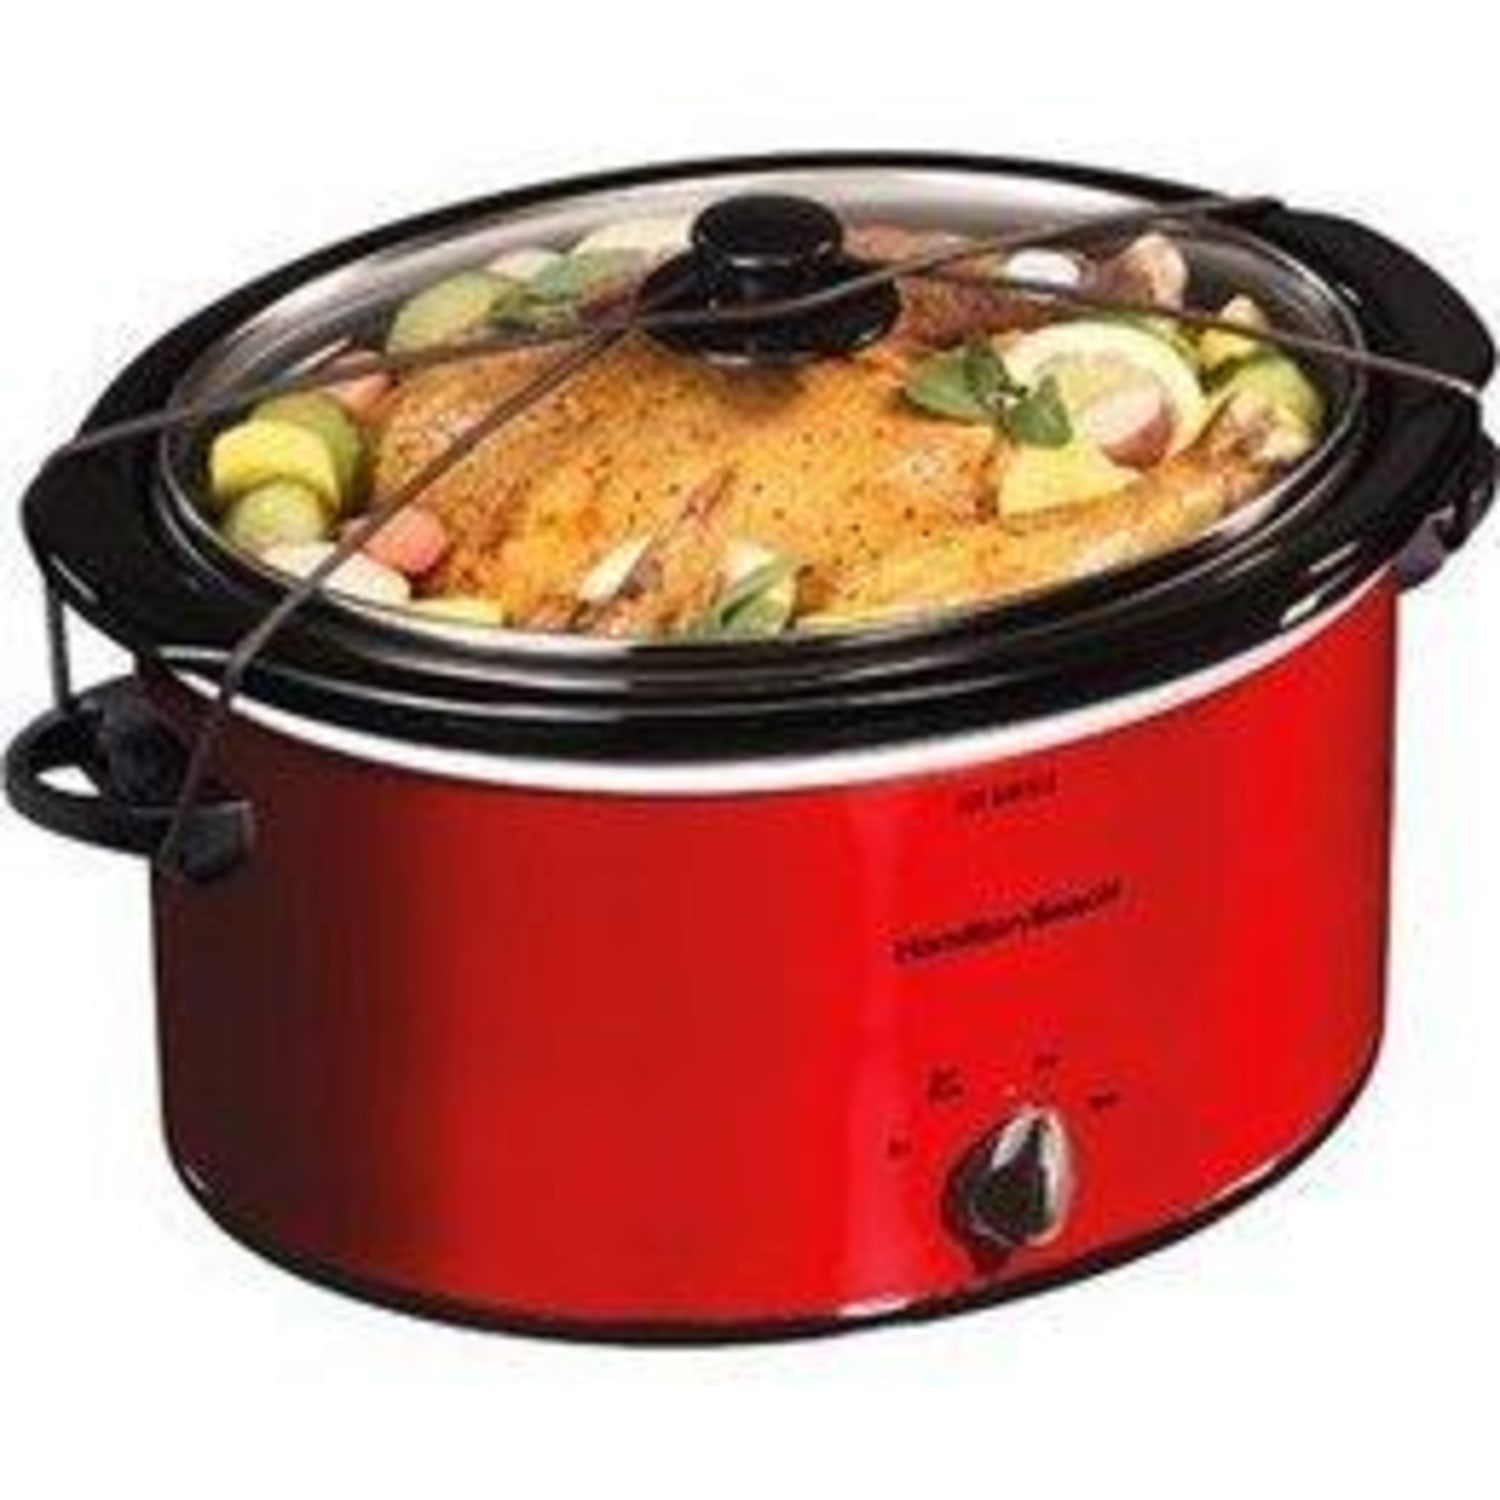 One of the most popular Crock-Pot slow cookers on  is on sale for $15